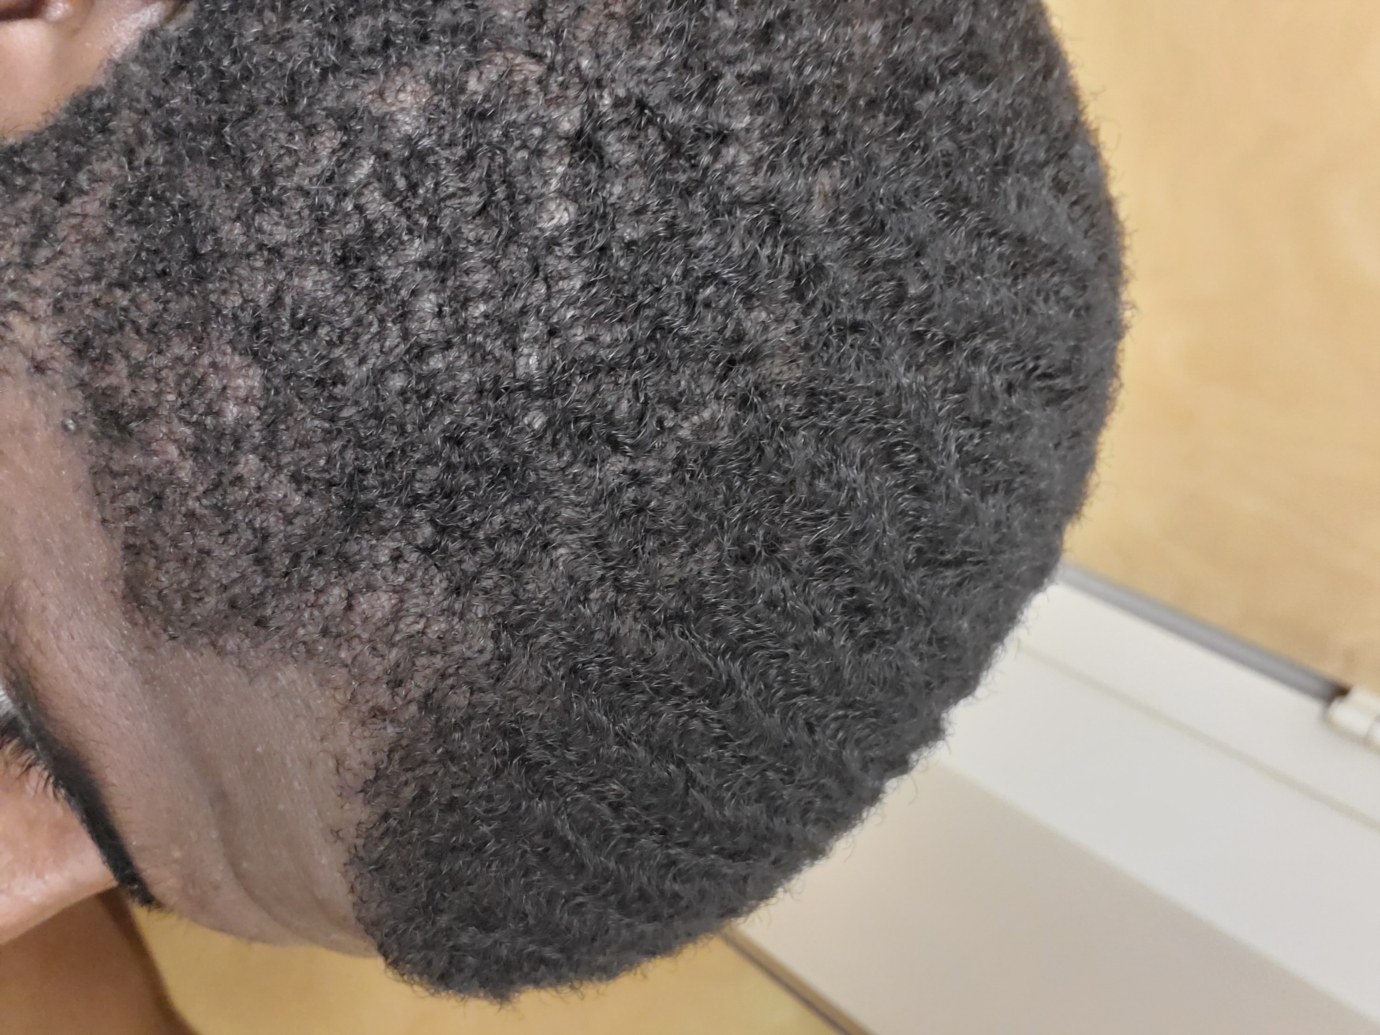 Unsure about hair loss | Alopecia and Hair Disorders | Forums | Patient